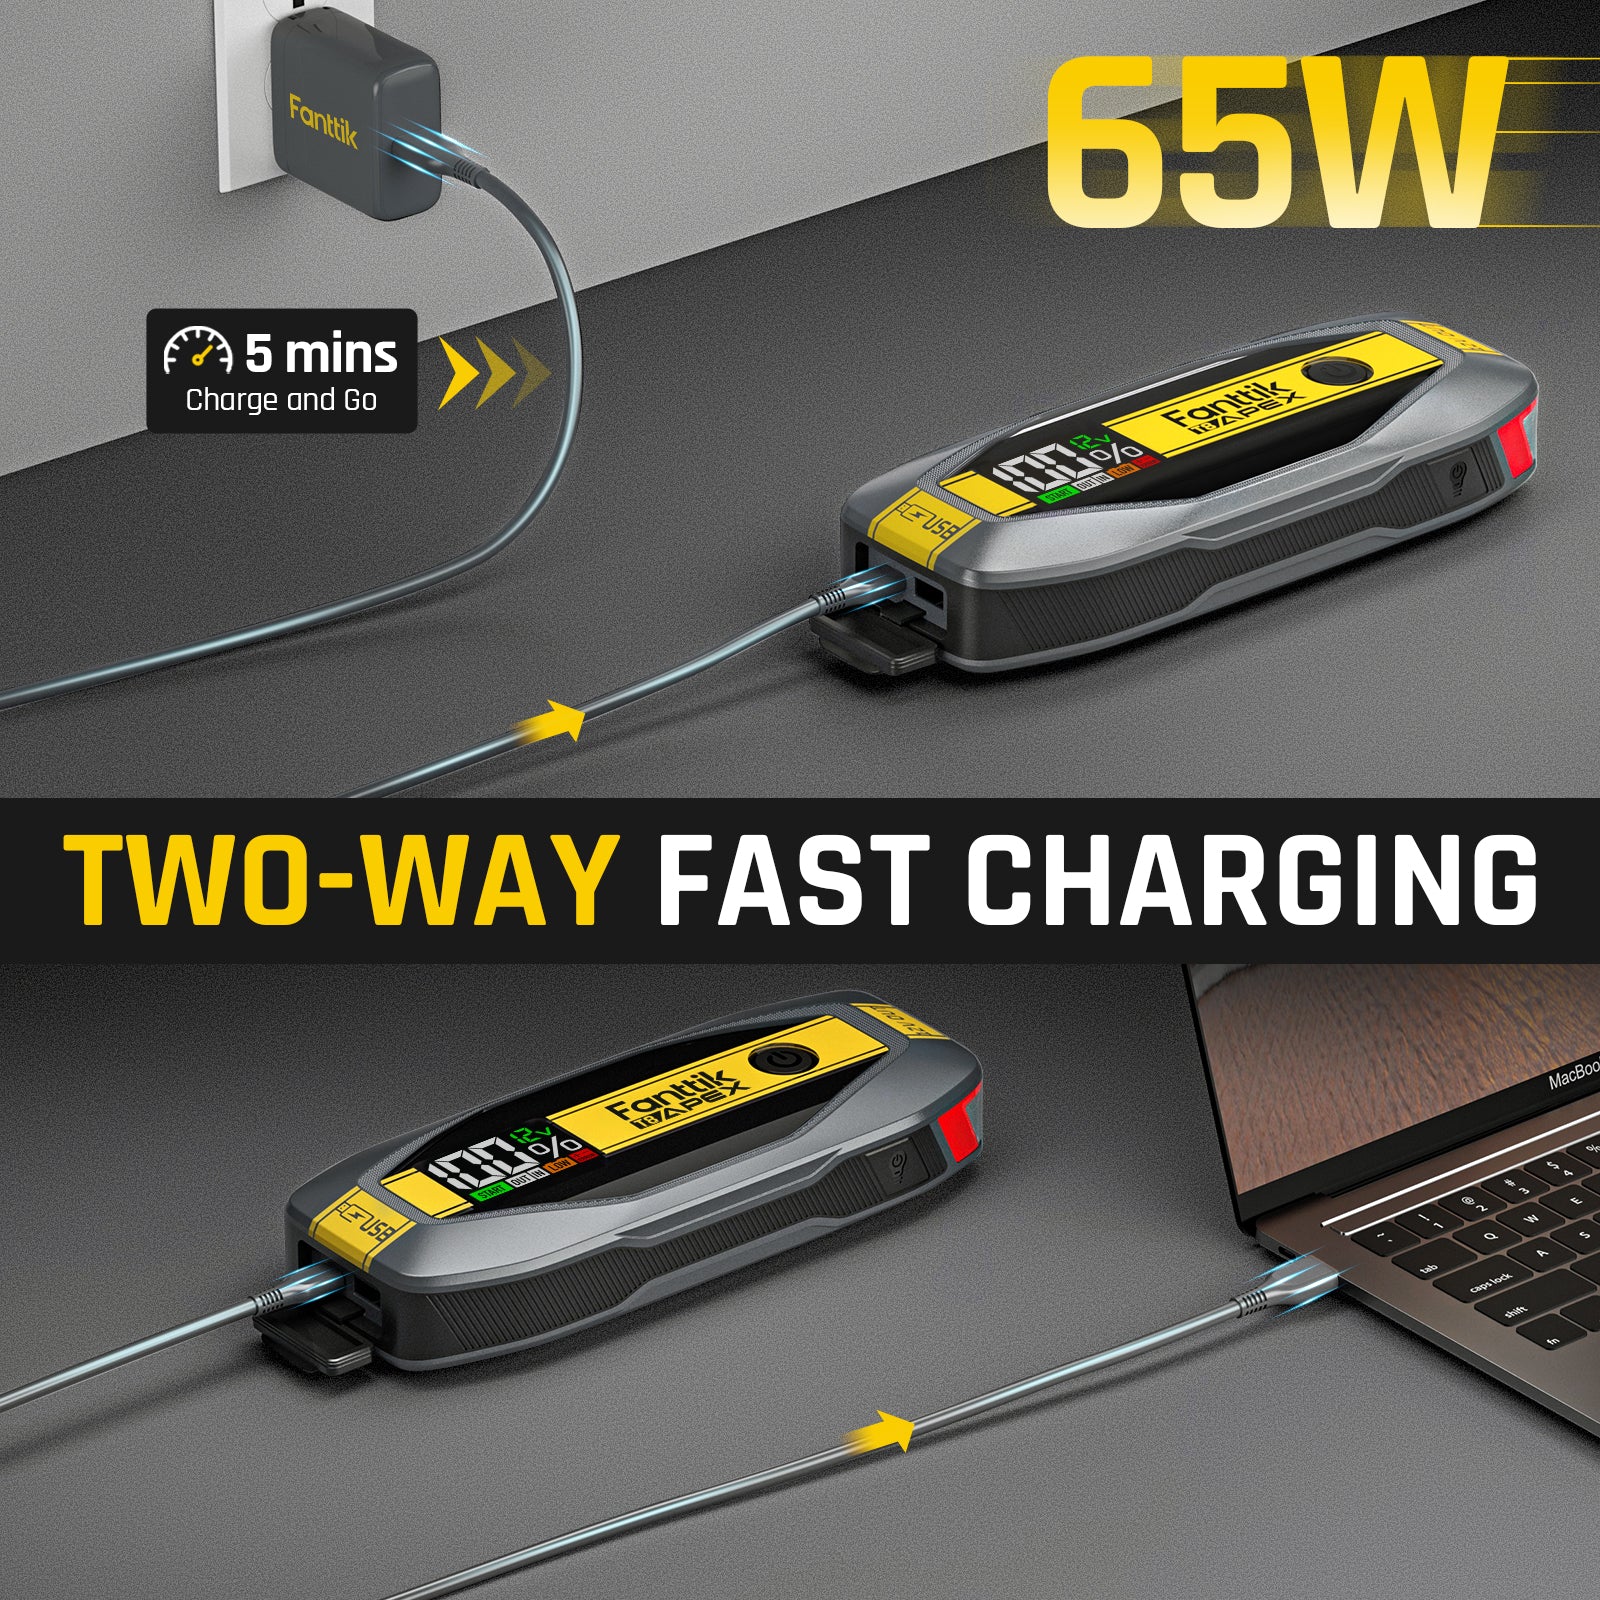 It's a powerful battery booster that offers Offers powerful 65W USB PD two-way super-charging and doubles as a portable power source for recharging USB devices, like a smartphone, tablet and more